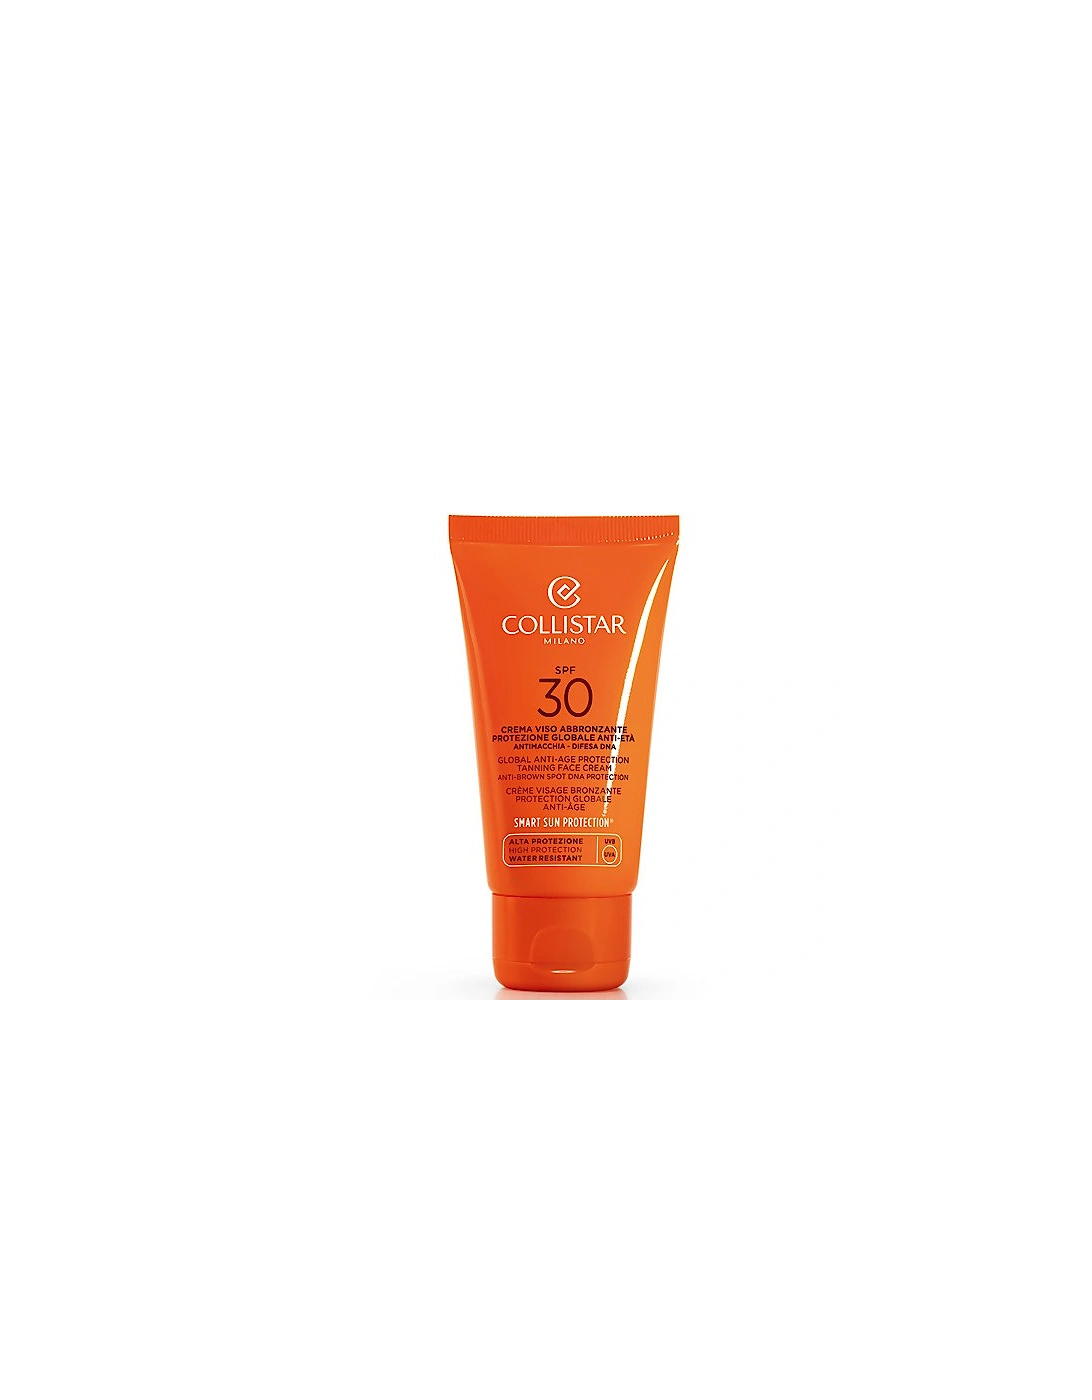 Global Anti-Age Protection Tanning Face Cream SPF 30 50ml, 2 of 1